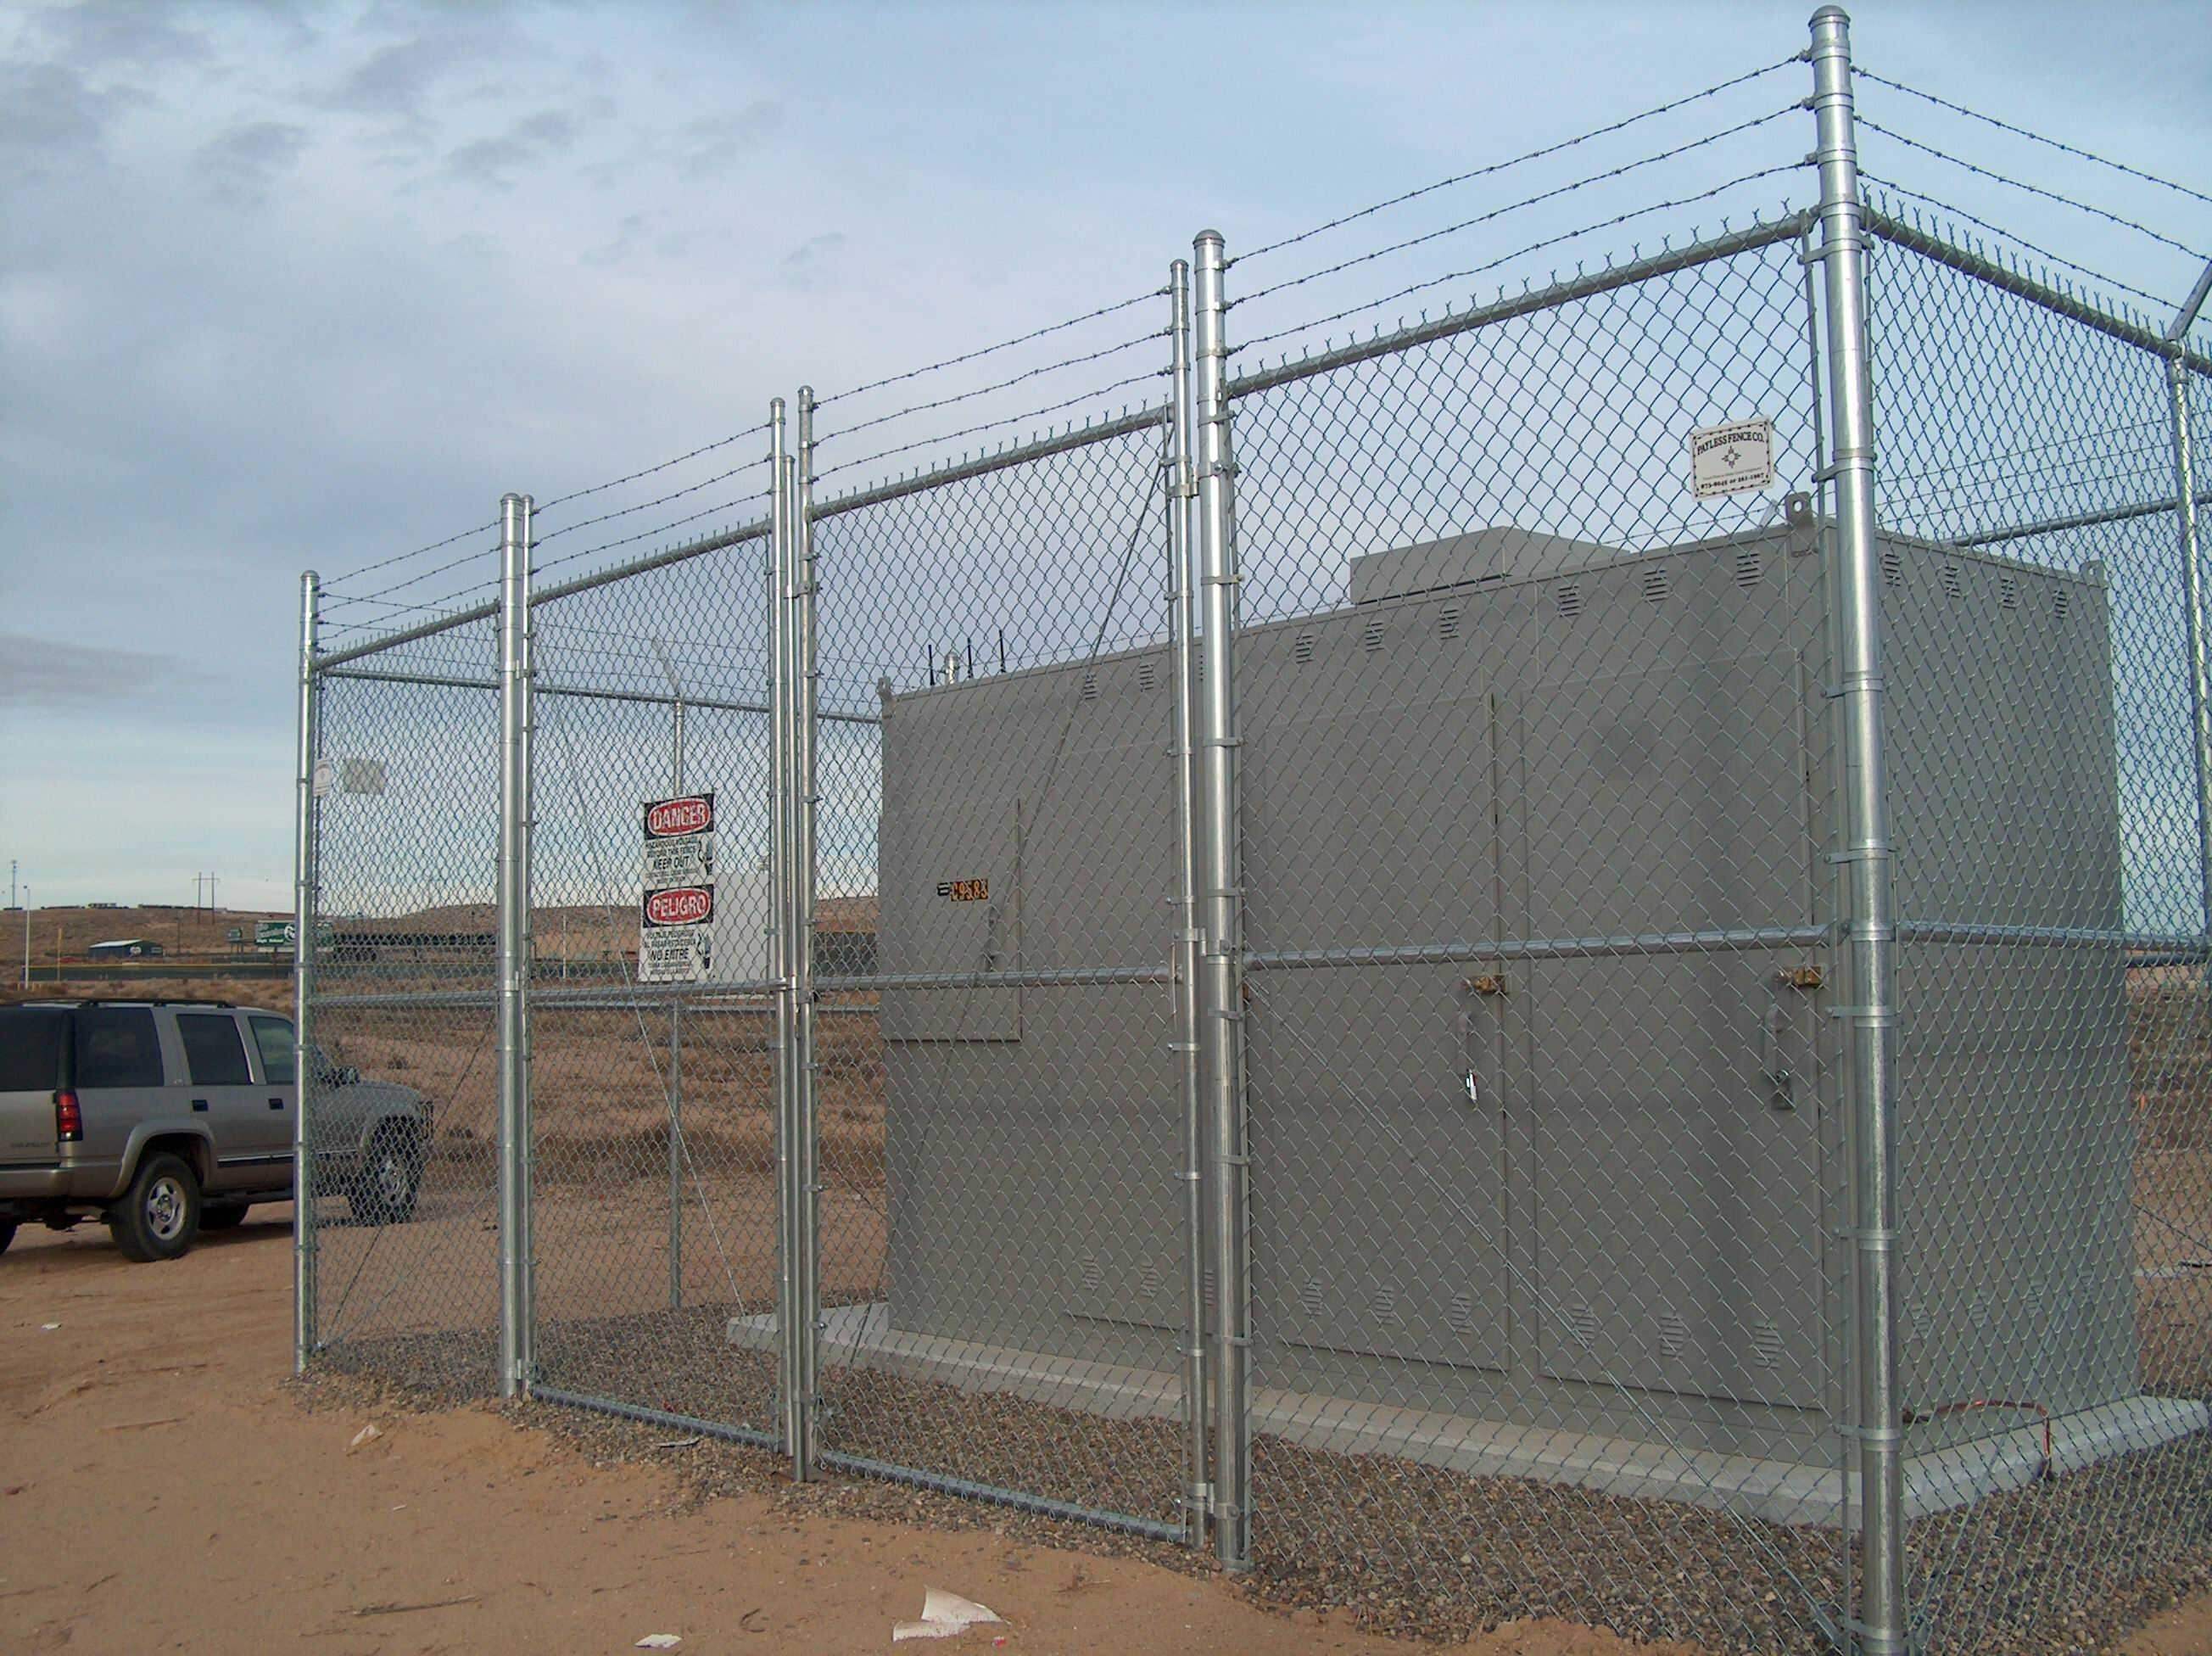 The Durability and Longevity of Chainlink Fences